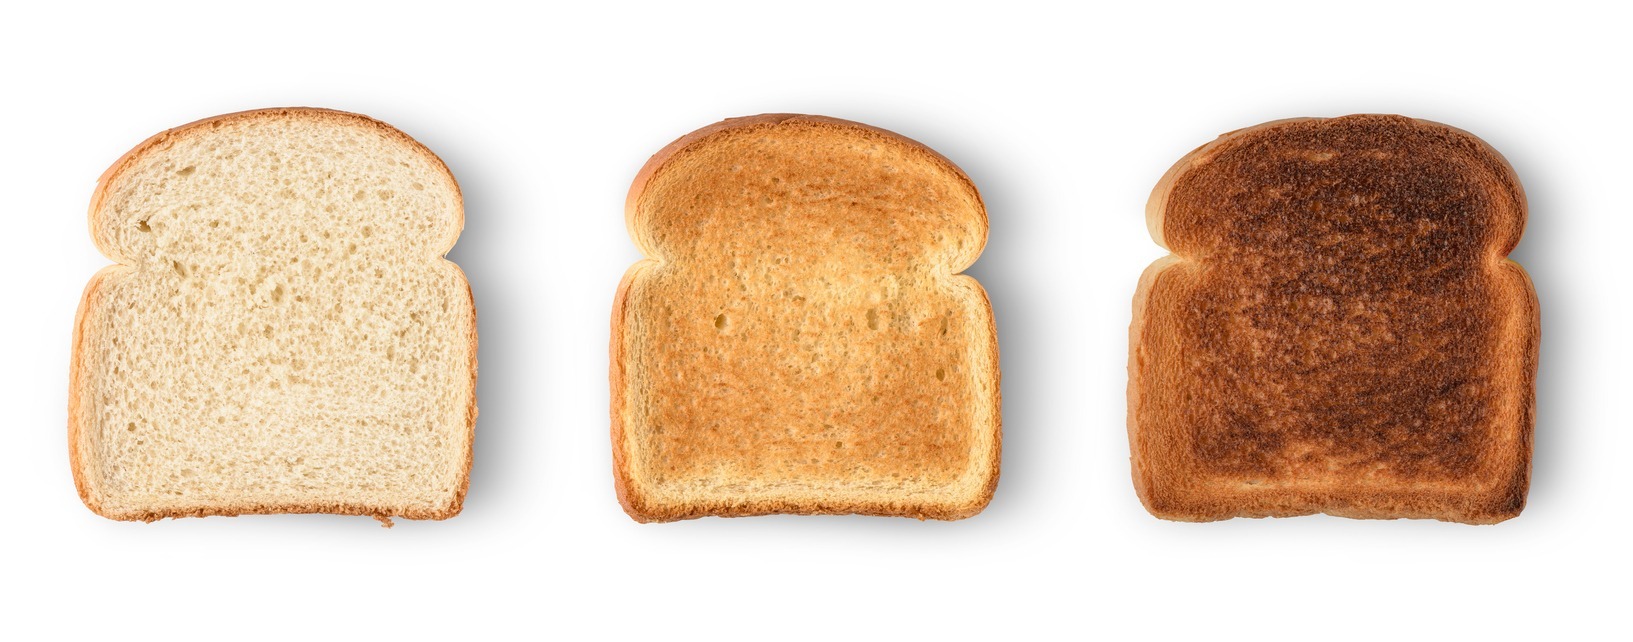 Different types of toasted bread